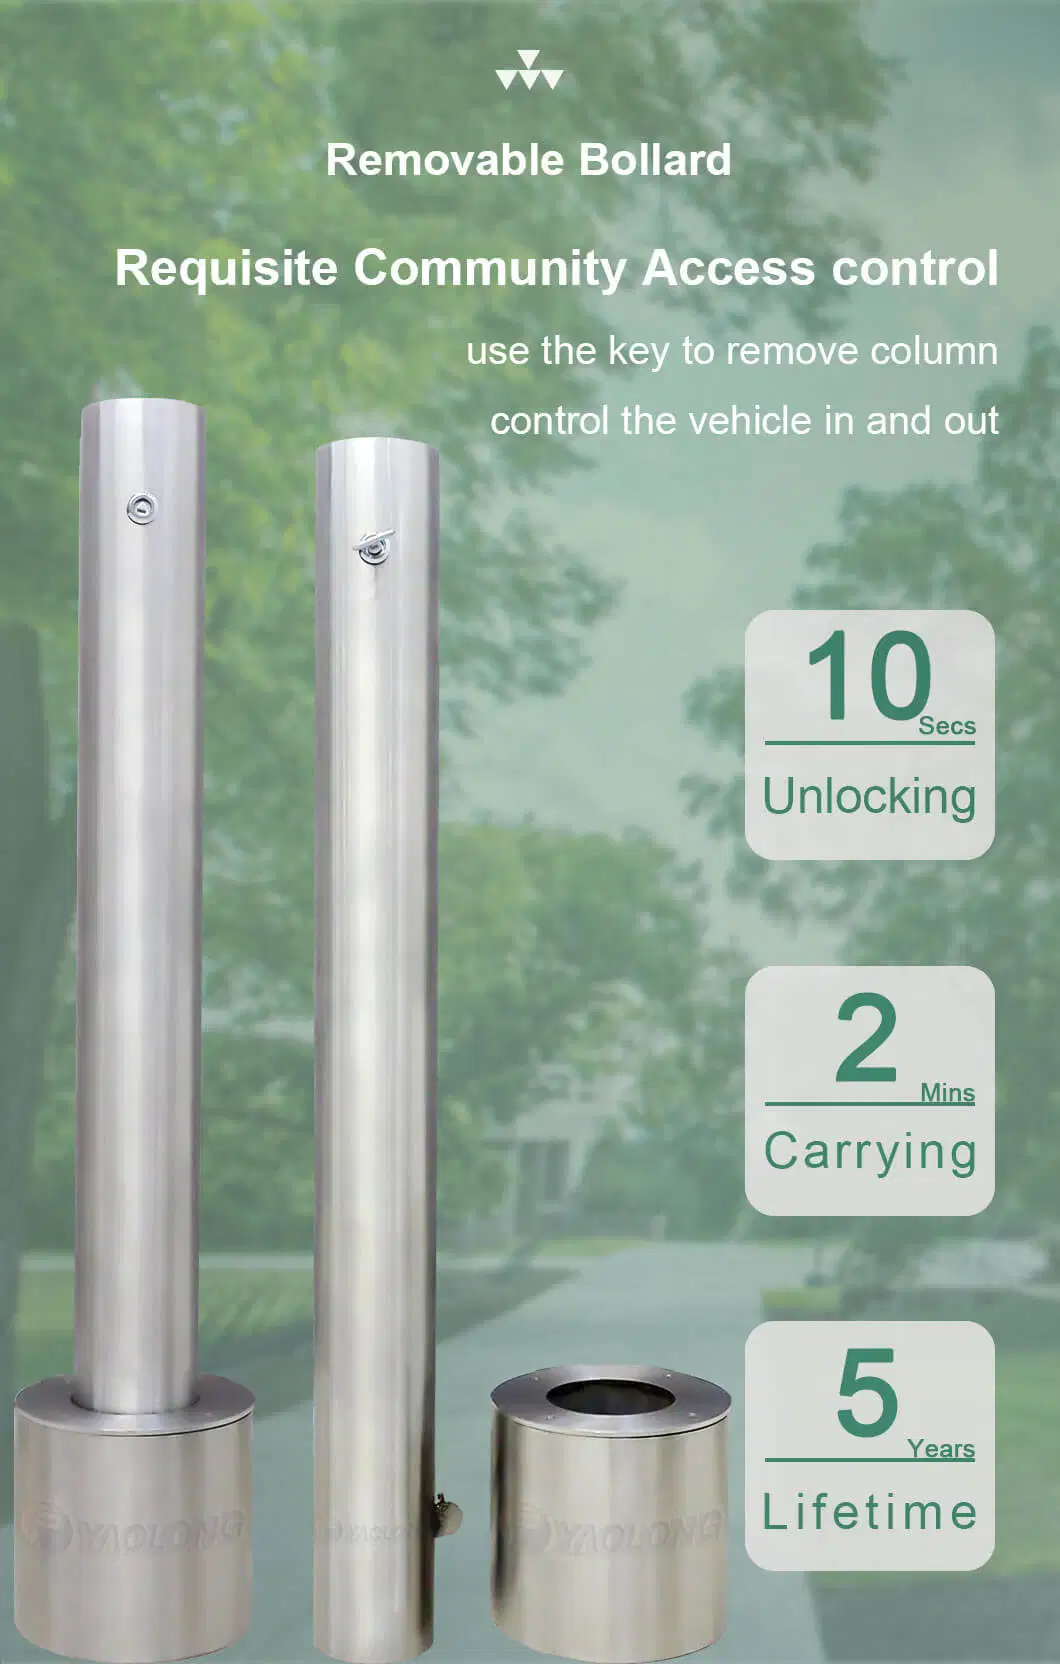 600mm Easy Mounting Stainless Steel Access Control Bollard